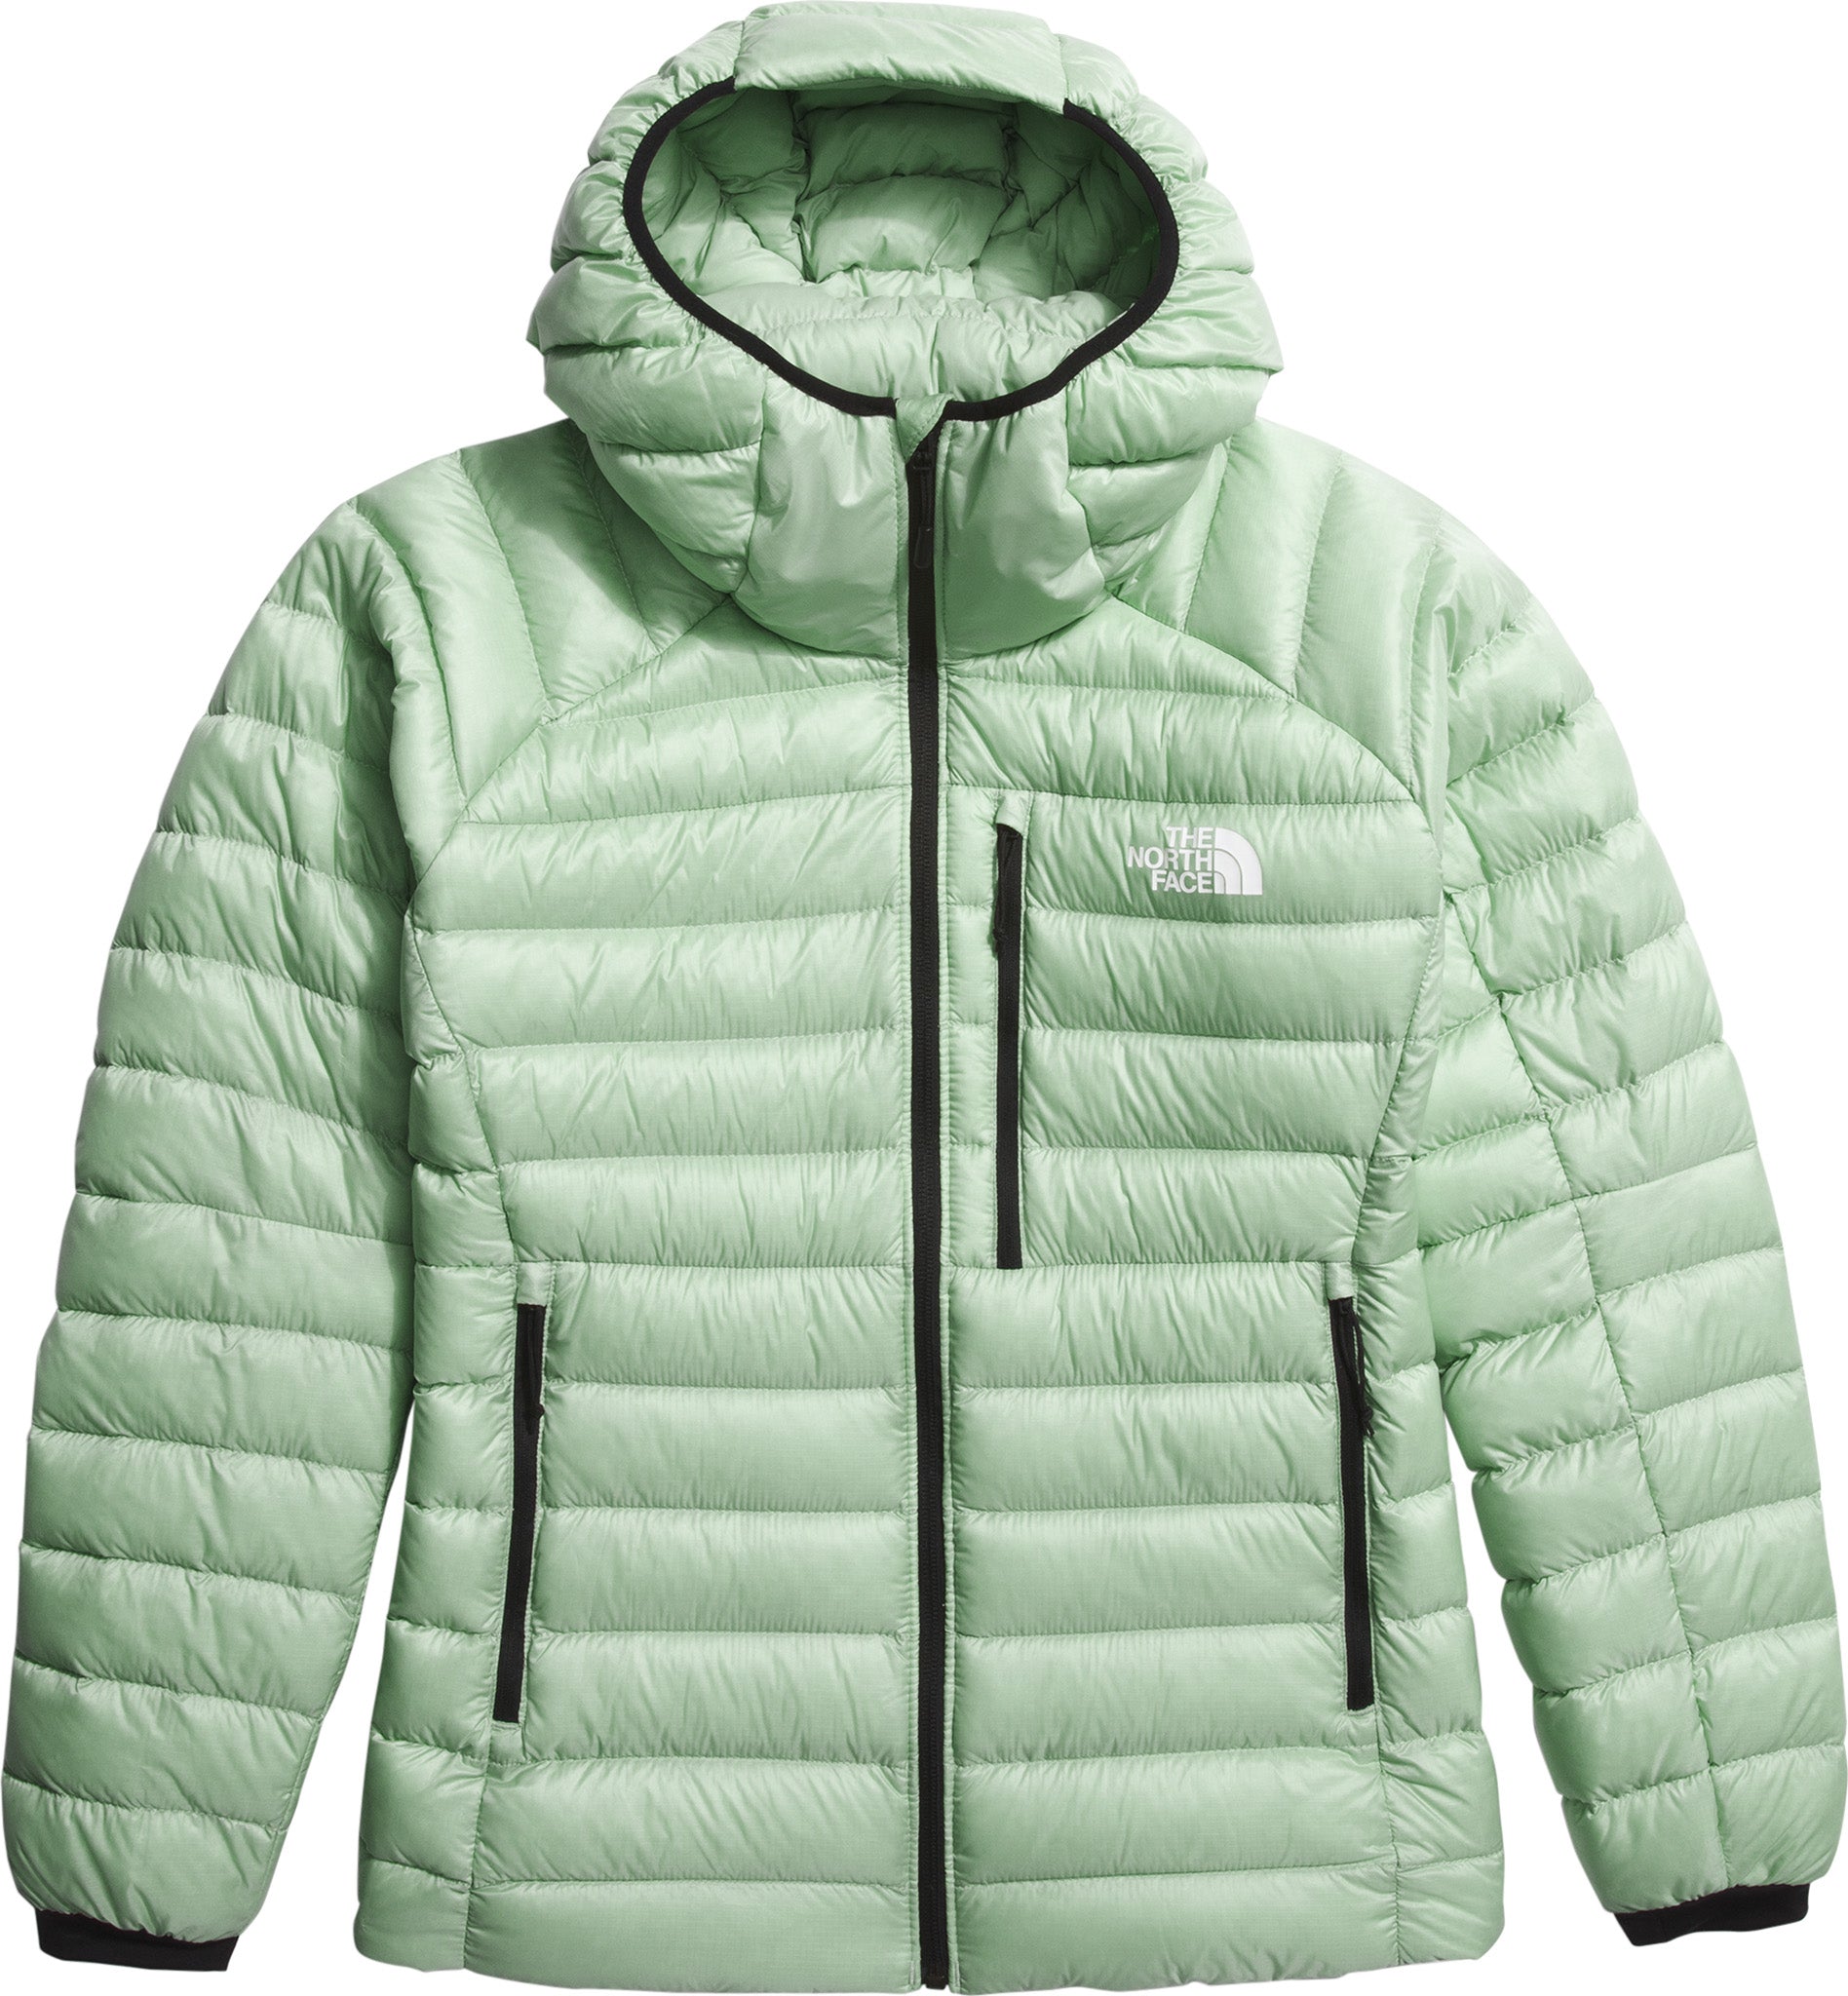 The North Face Belay Sun Hooded Shirt - Women's - Clothing